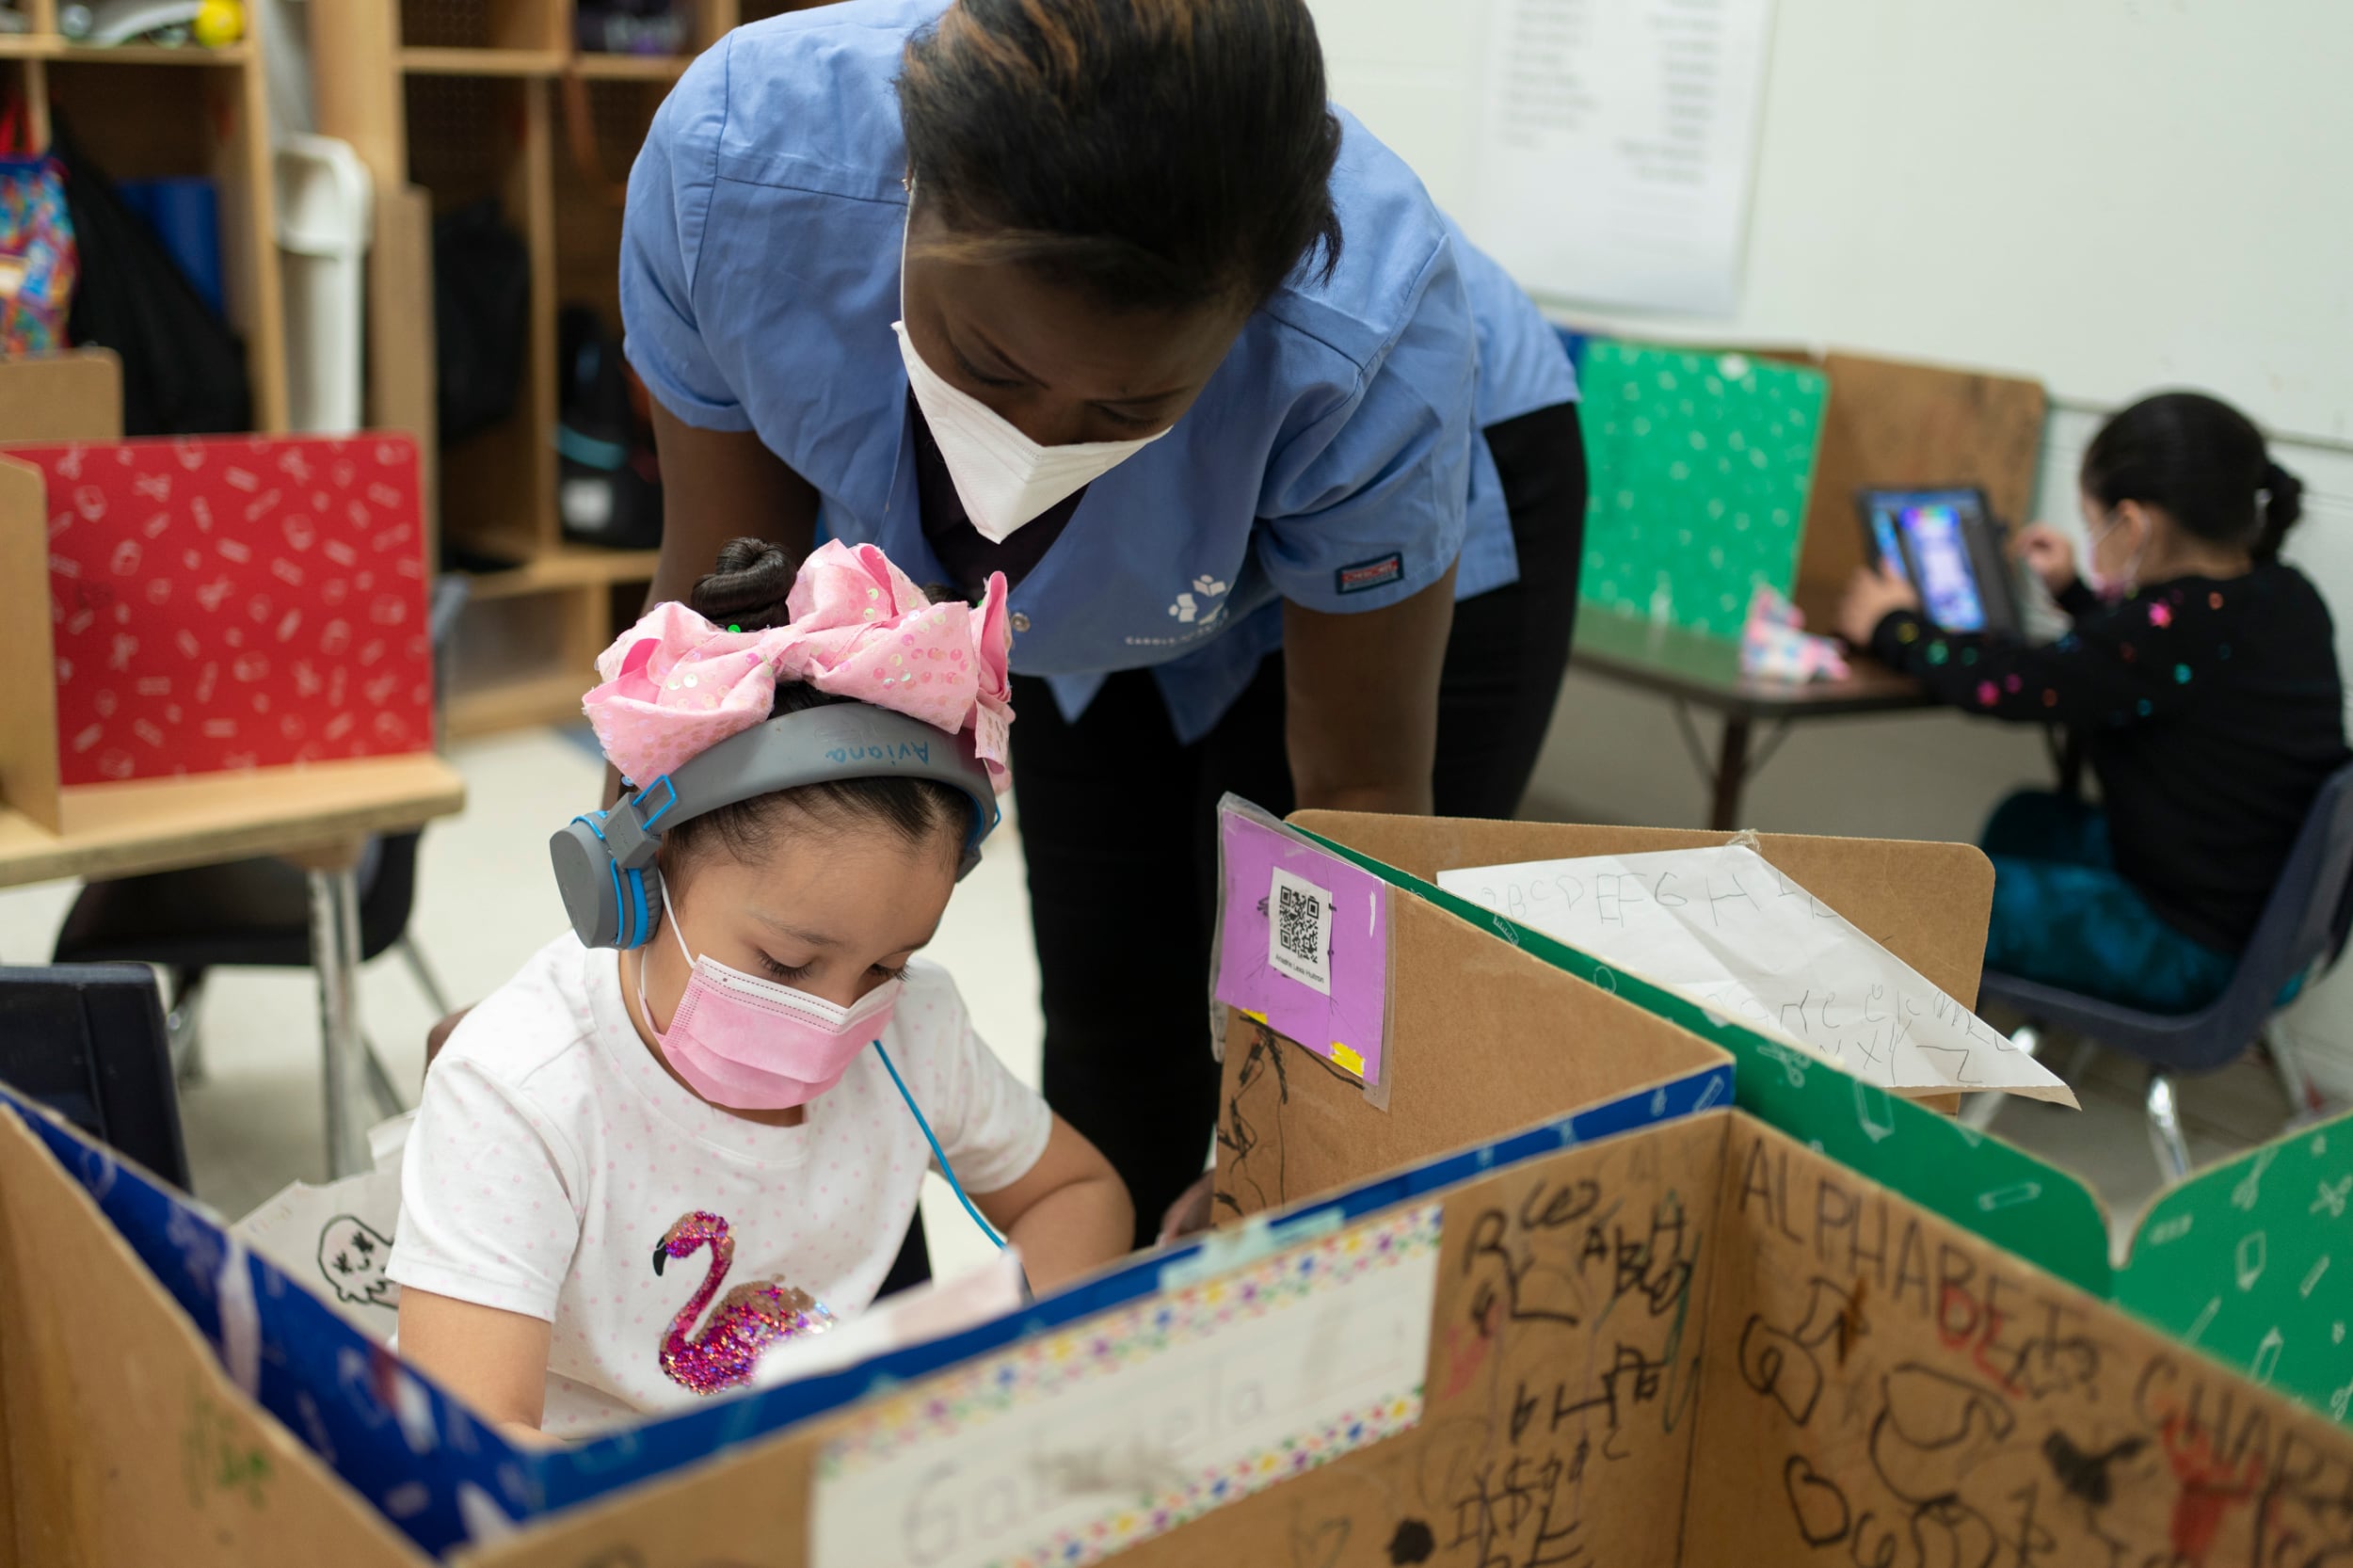 A girl wearing a pink bow, pink protective mask and white shirt with a flamingo works on an assignment with a teacher looking over her shoulder, wearing a blue shirt and KN-95 mask. Another child studies in the background.